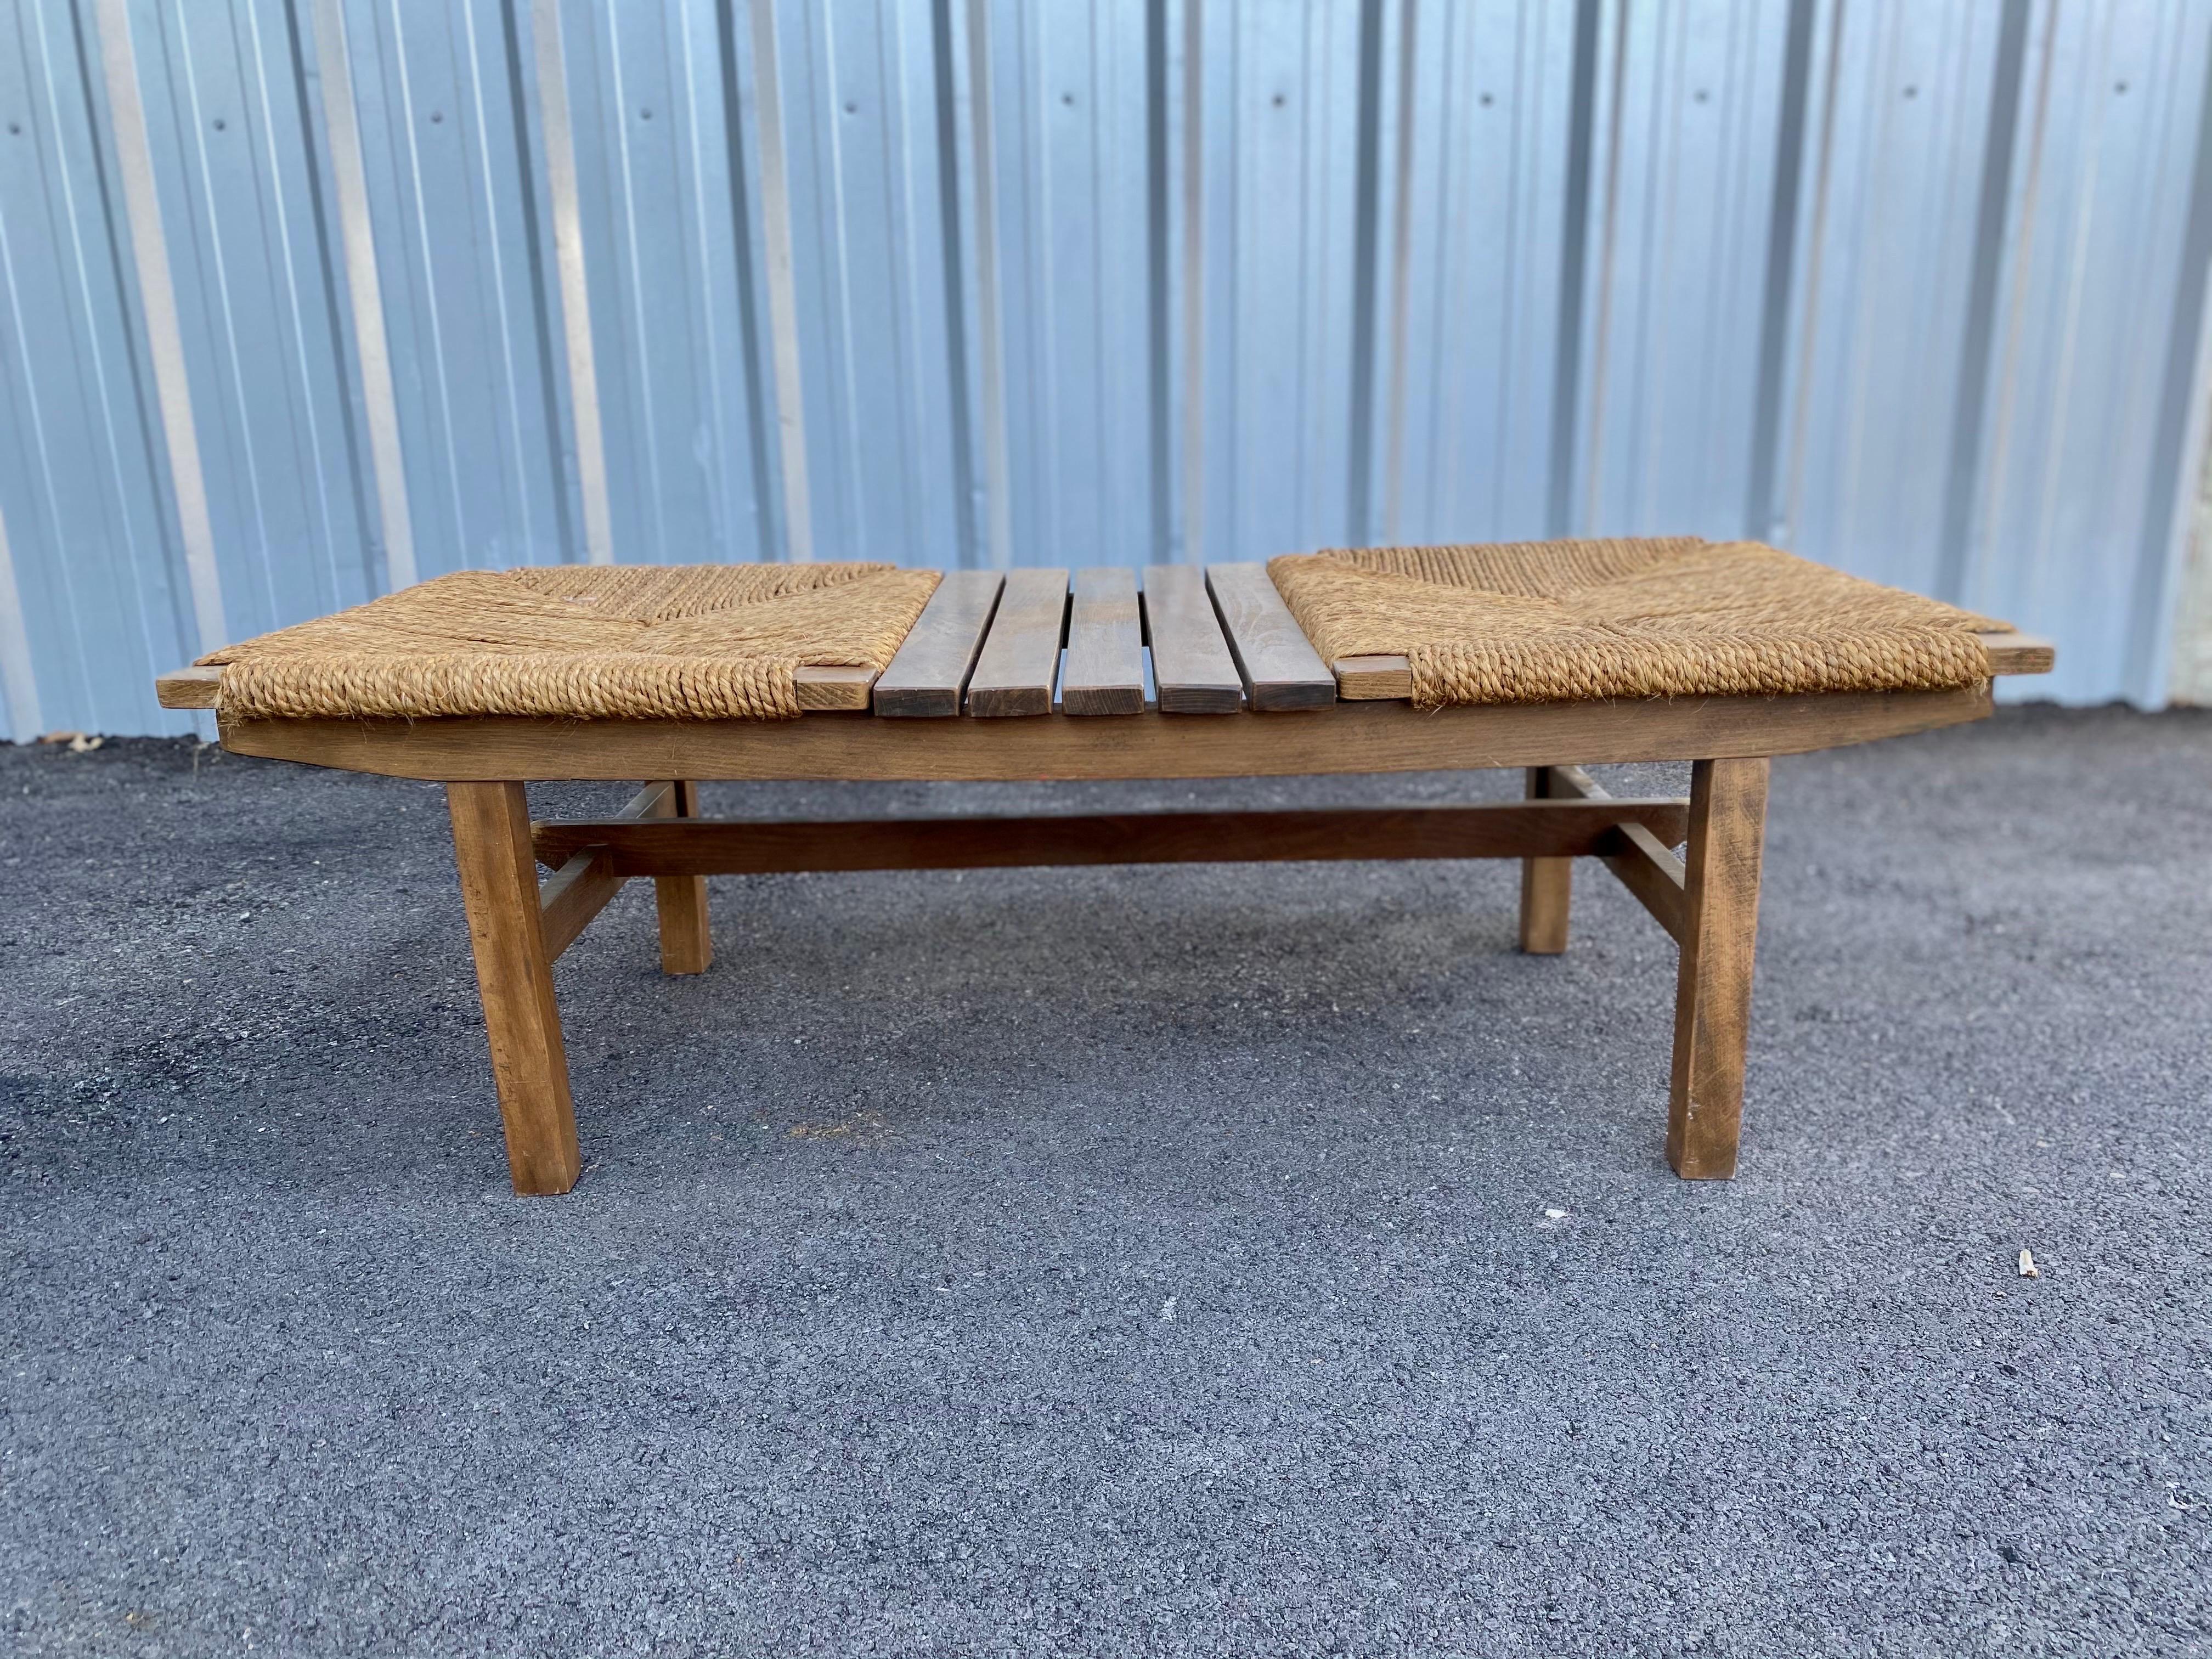 Beautiful minimalist AFM Quality Furniture Japanese modernist slat bench with a rush seat is made of walnut, circa 1960s, Japan. Similar to Scandinavian modern design, Japanese design has the same clean lines that are simple, understated, and